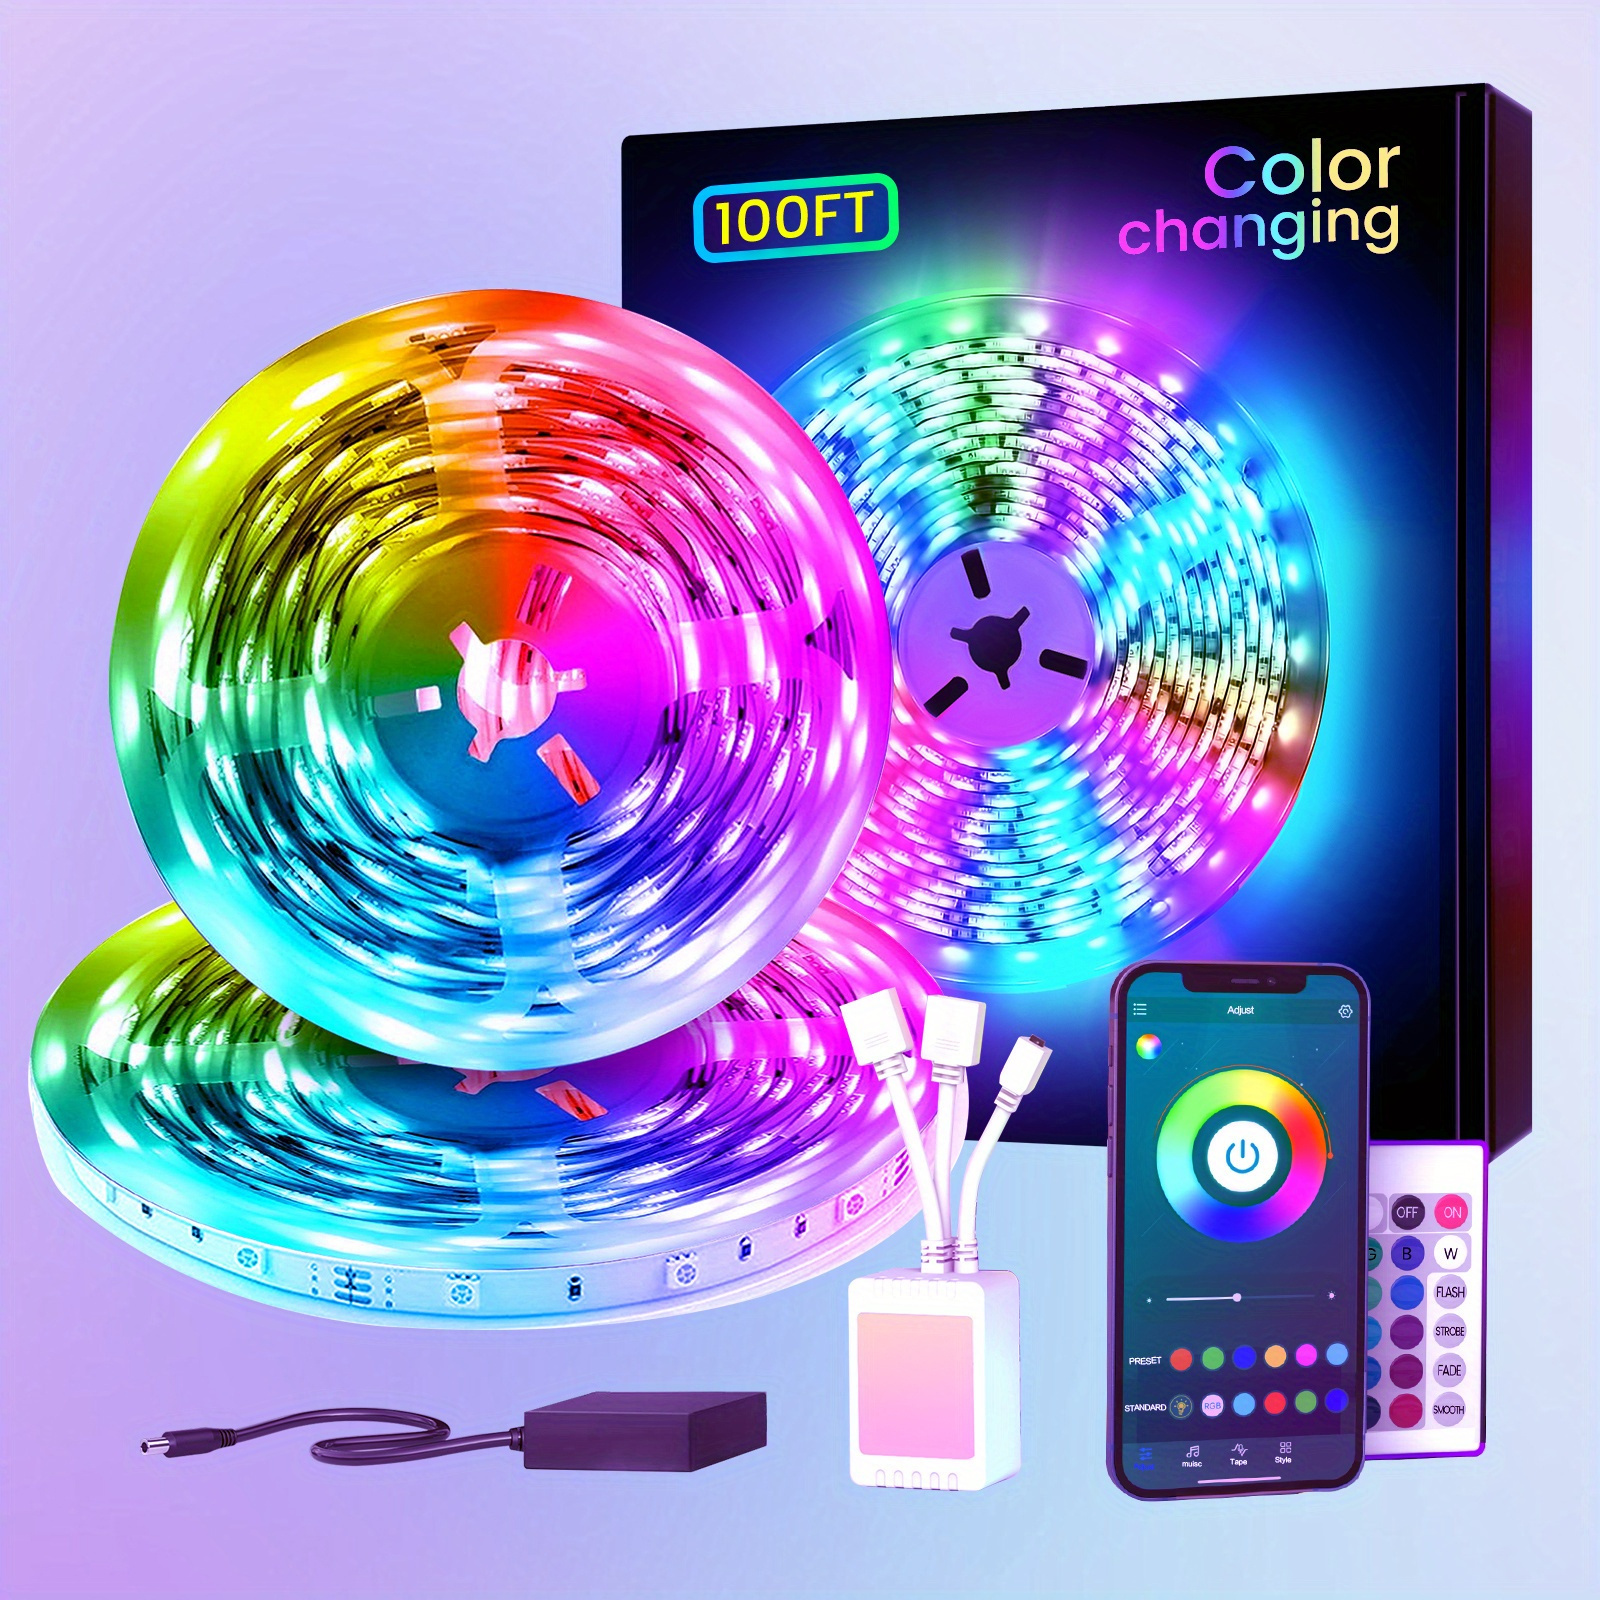 

100ft 30m Led Smart Light Strips (2 Rolls Of 15m) With App Control Remote, Rgb Led Lights 24v For Bedroom, Home, Decoration Music Sync Color Changing Lights For Room Party Birthday Party